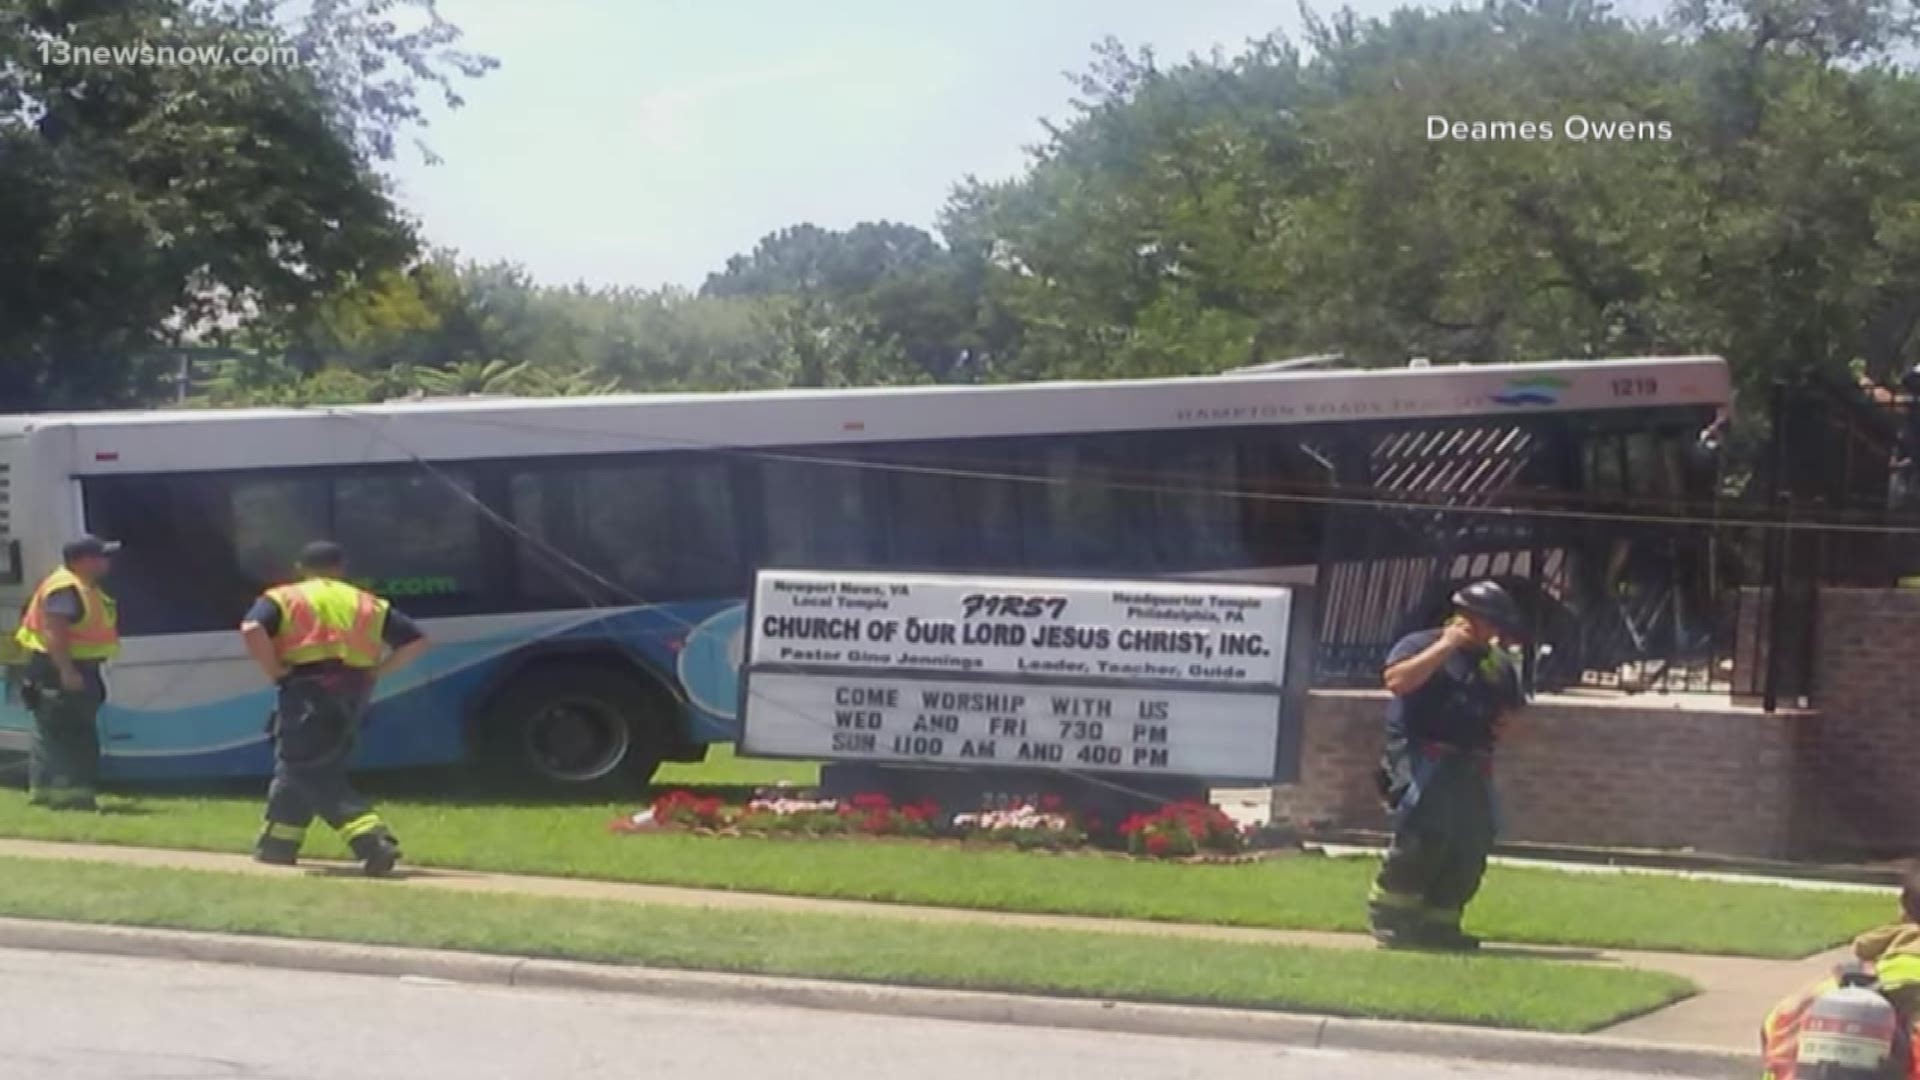 The bus driver told police another driver cut the bus off. The driver then lost control of the bus and crashed into the First Church of Our Lord Jesus Christ in Newport News.